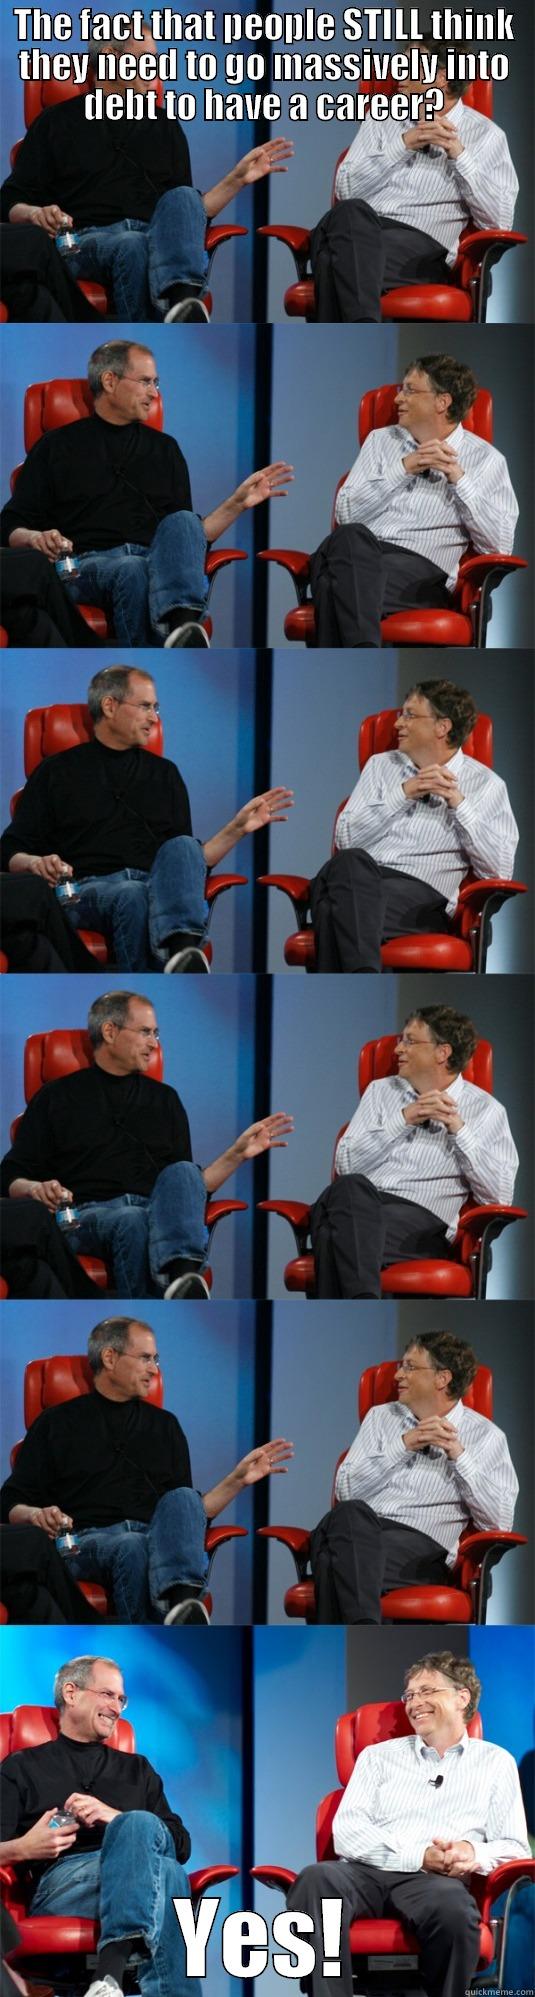 THE FACT THAT PEOPLE STILL THINK THEY NEED TO GO MASSIVELY INTO DEBT TO HAVE A CAREER? YES! Steve Jobs vs Bill Gates